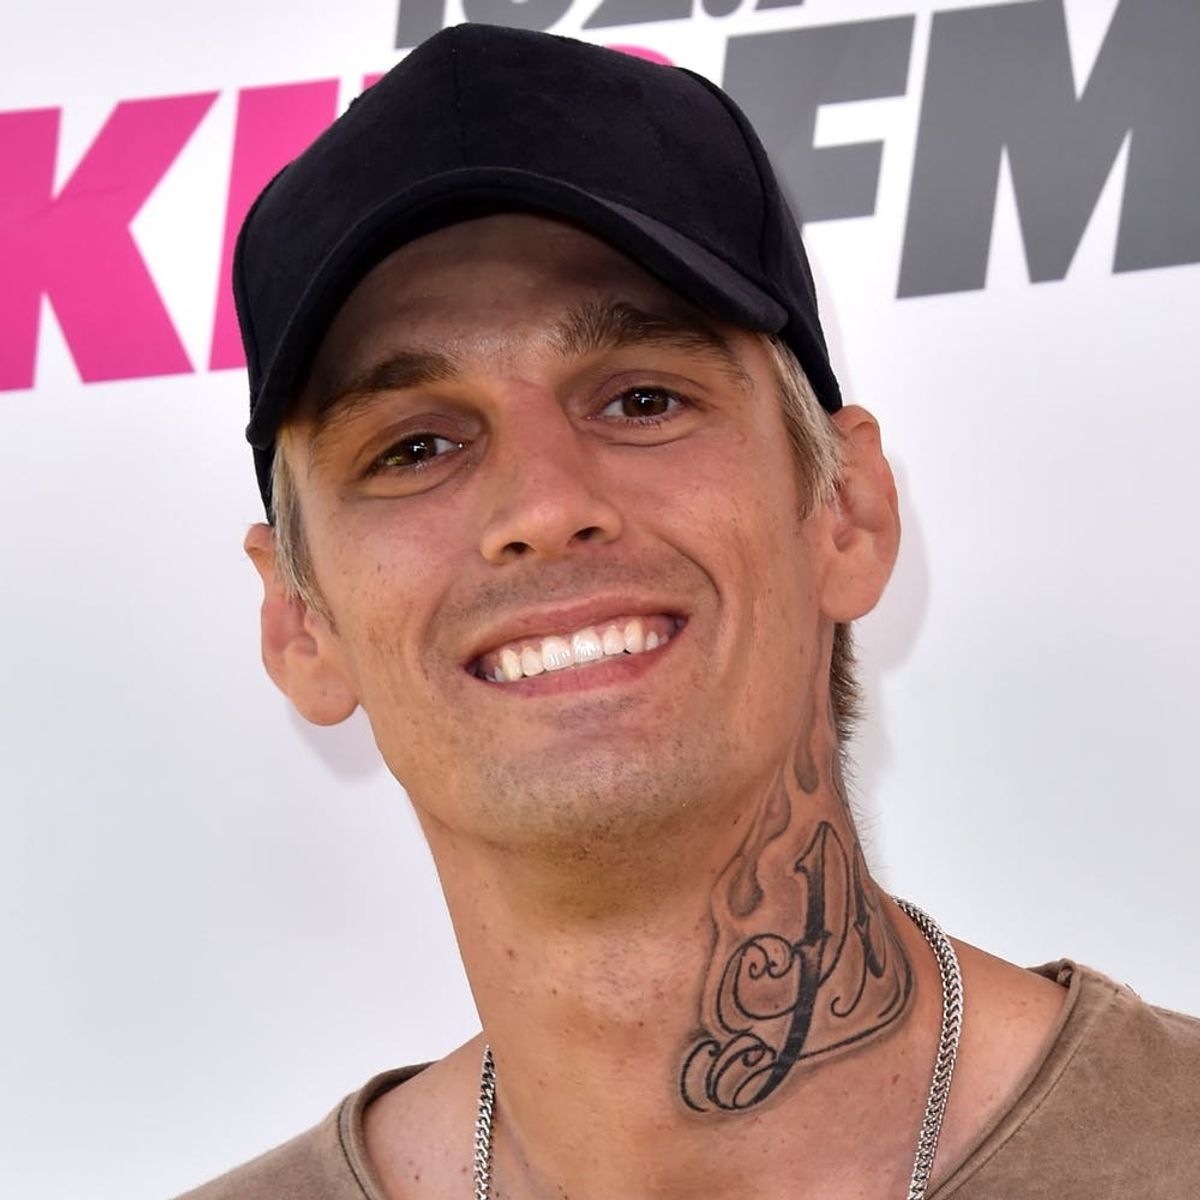 Aaron Carter Is Here to Remind Us All That Body Shaming Affects Men Too